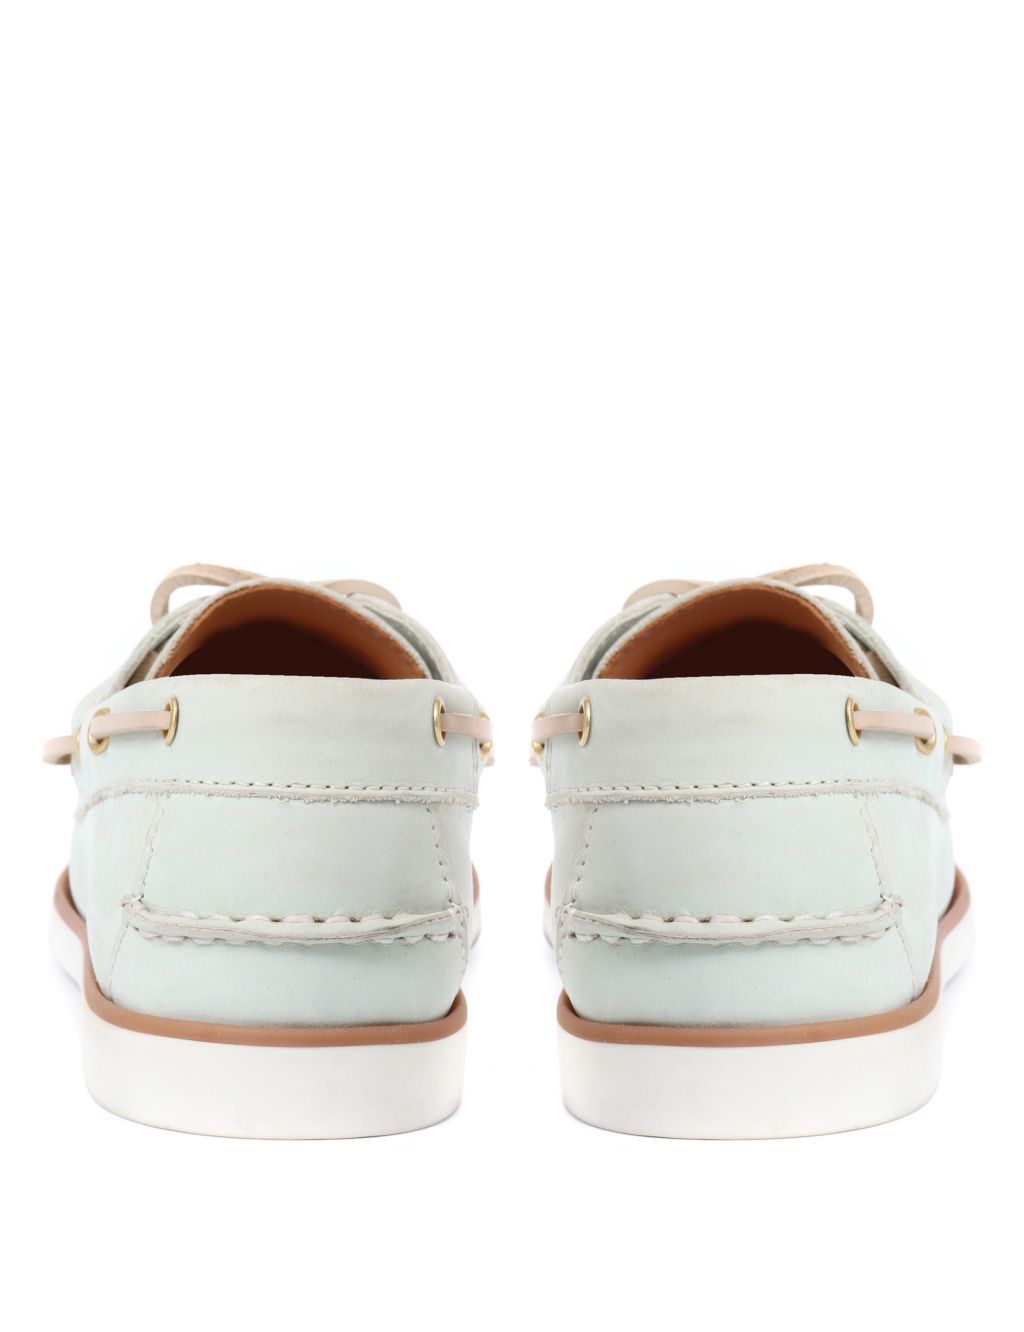 Leather Lace Up Slip On Boat Shoes image 3